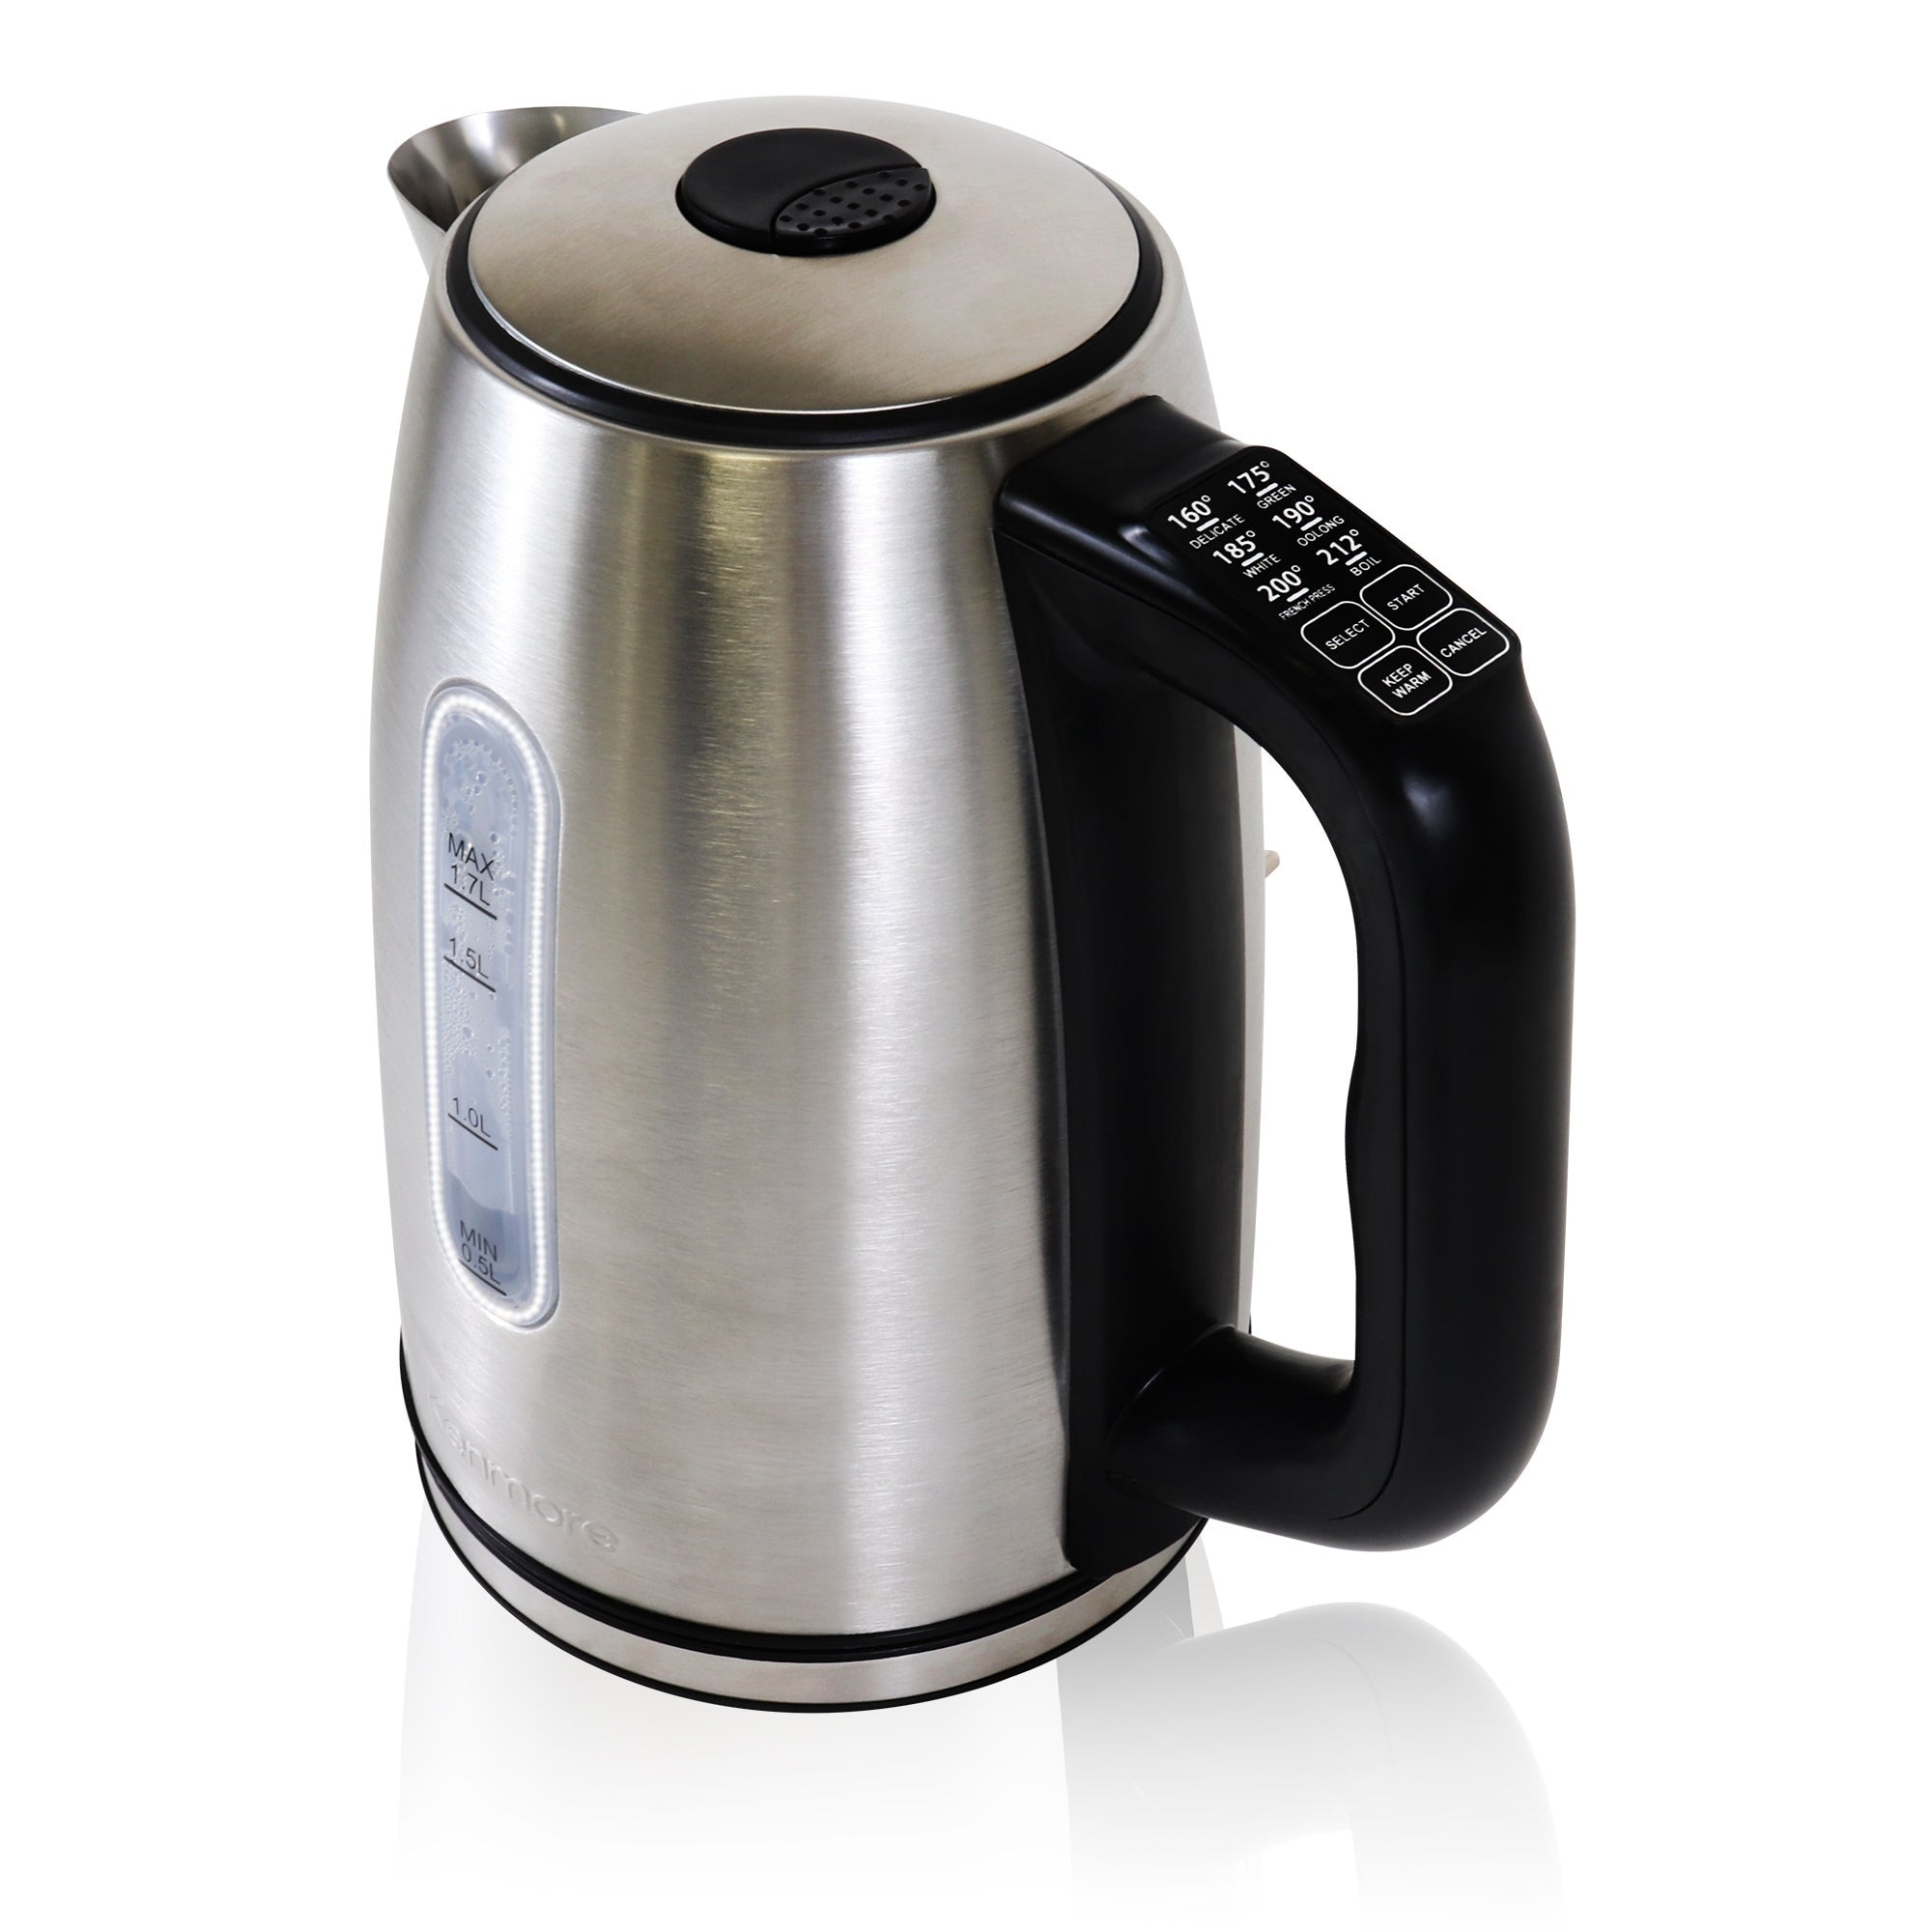 https://ak1.ostkcdn.com/images/products/is/images/direct/b227333c8112630a3dd9cc00a9190fa22d957f1d/Kenmore-1.7L-Cordless-Electric-Kettle-w--6-Temperature-Pre-Sets%2C-Stainless-Steel-Teakettle.jpg